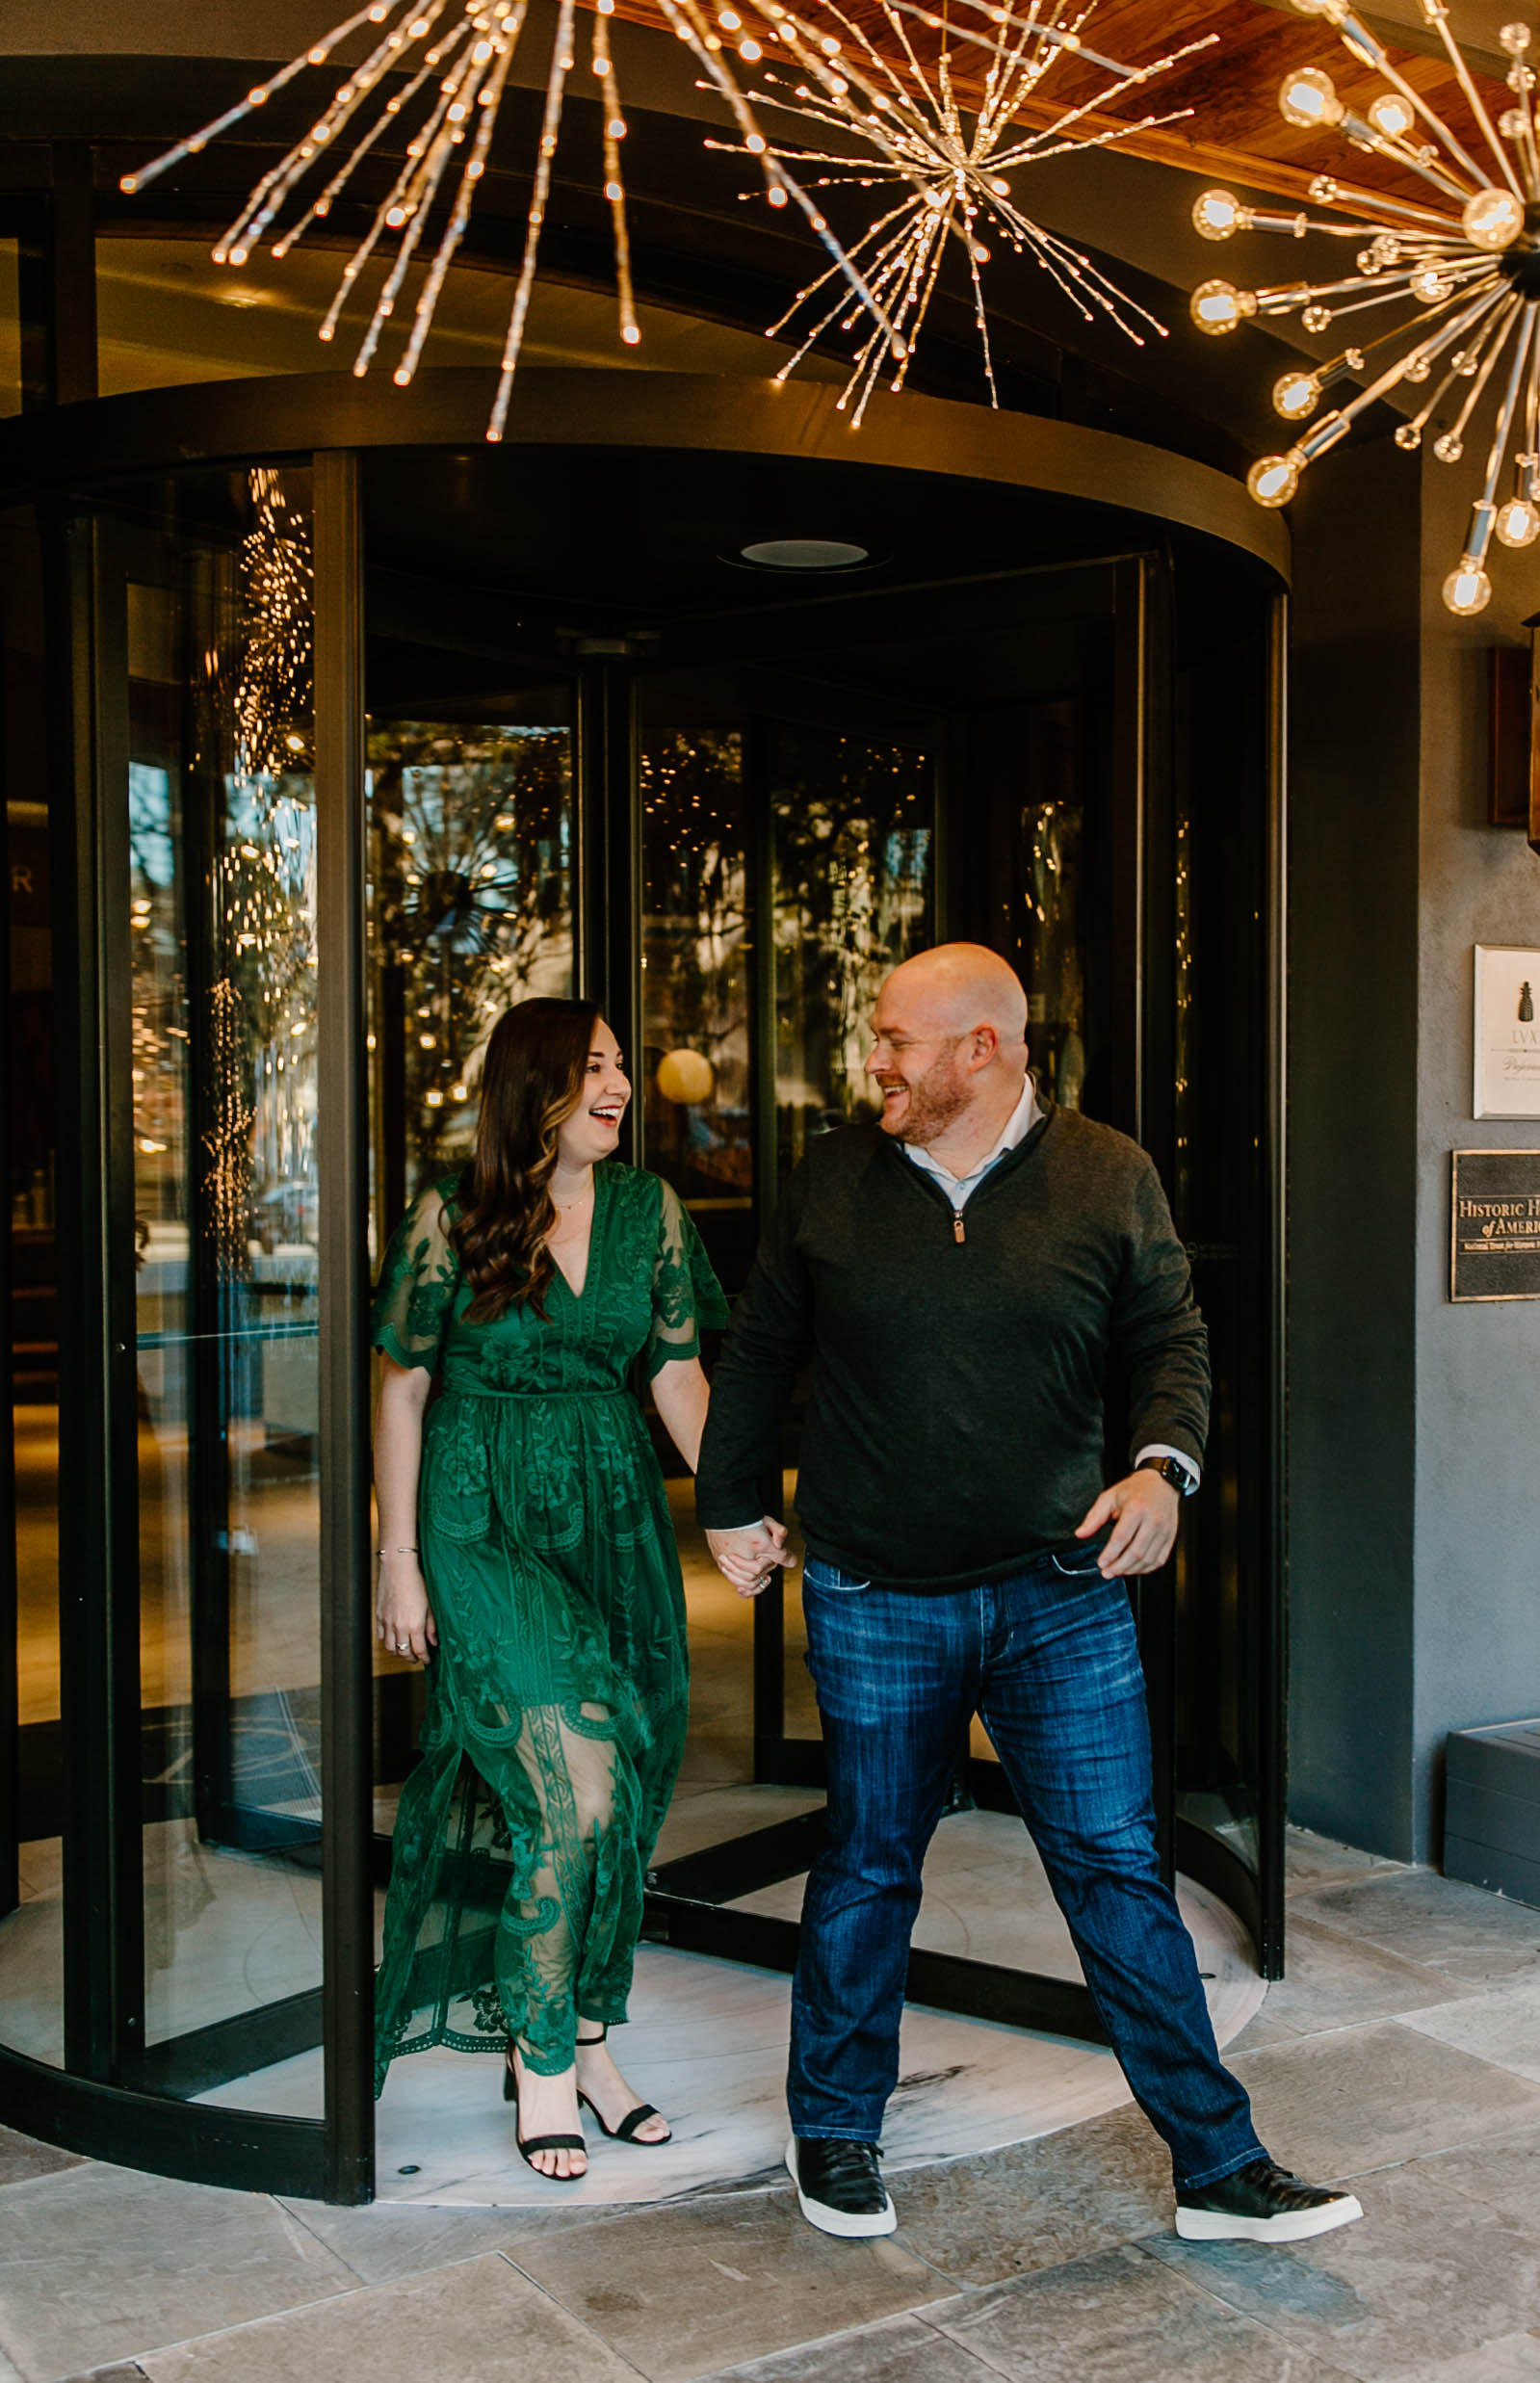 The Dewberry Engagement Photos